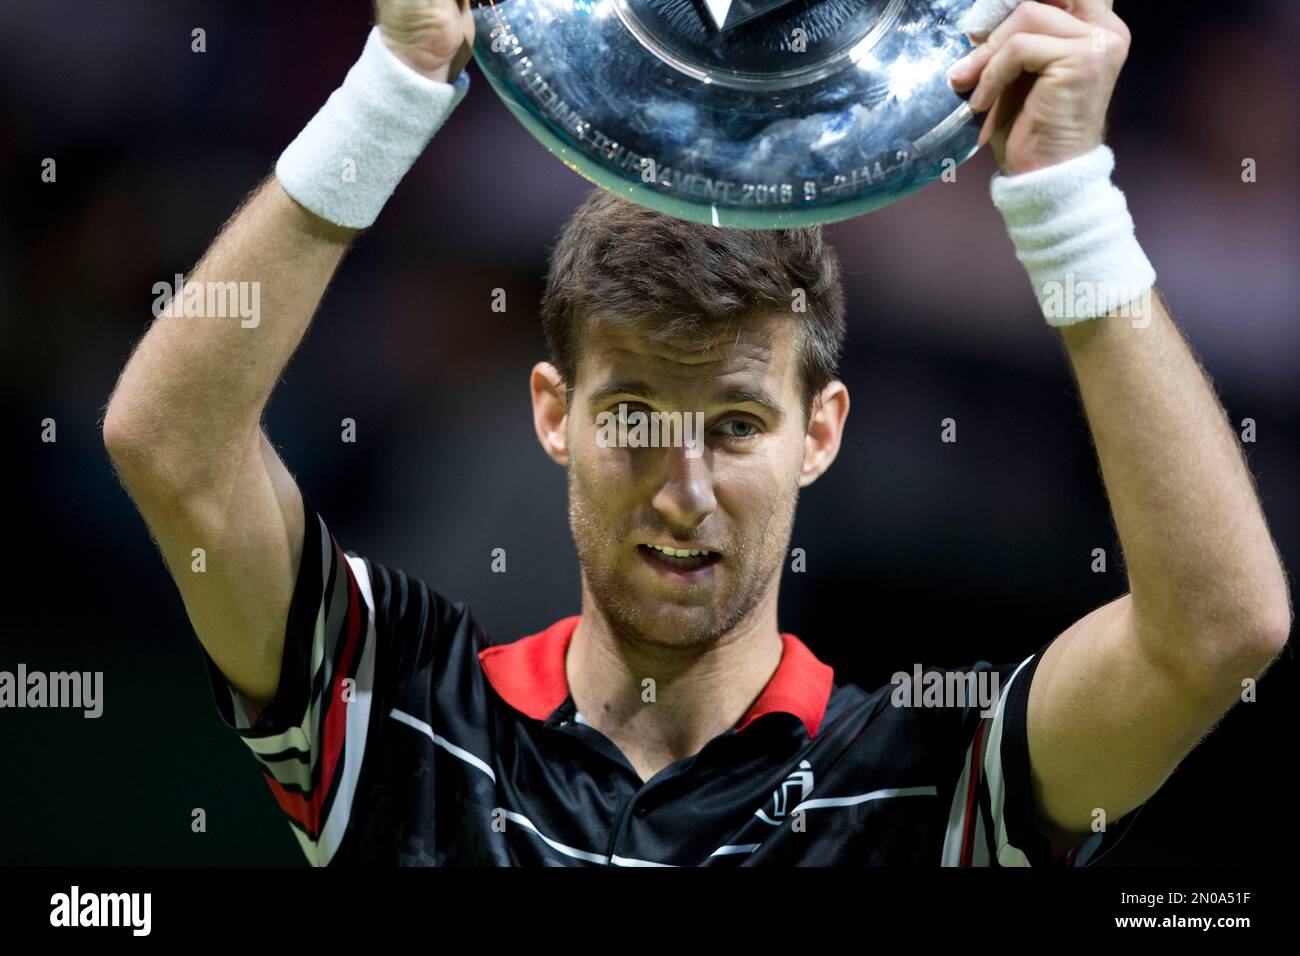 Slovakia's Martin Klizan holds the trophy after winning the ABN AMRO world  tennis tournament against France's Gael Monfils in three sets 6-7 (1-7),  6-3, 6-1, at the Ahoy arena in Rotterdam, Netherlands,